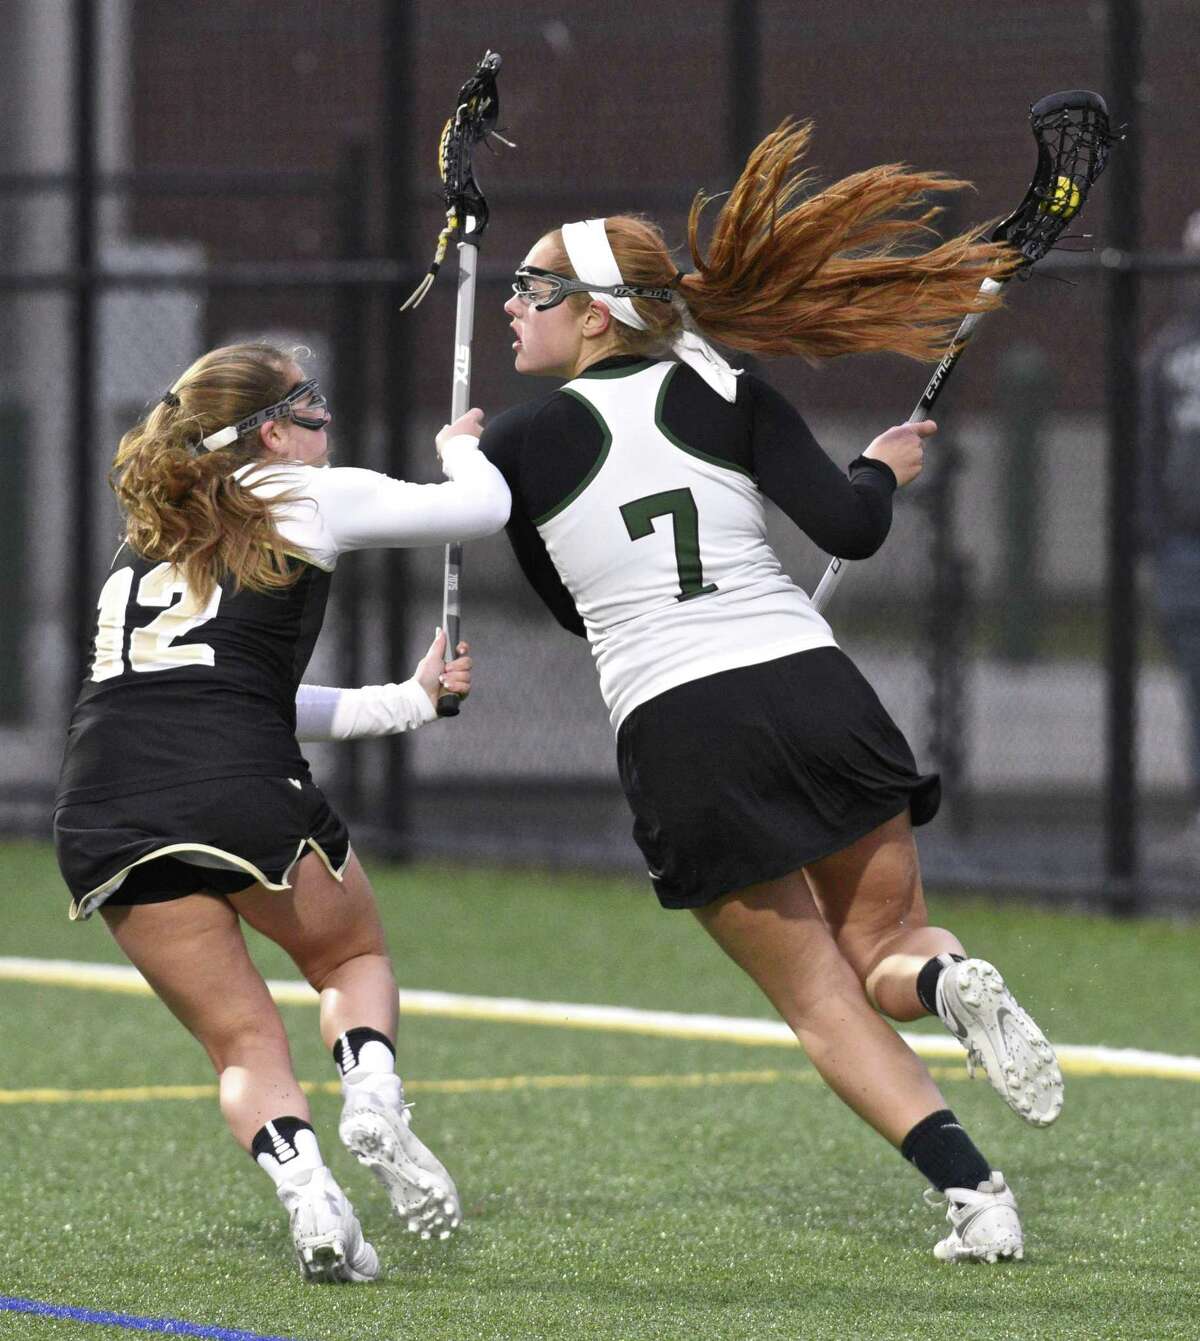 New Milford's Grace O'Donnell (7) is defended by Barlow's Sydney Lockwood (12) behind Barlow's goal in the girls lacrosse game between Joel Barlow and New Milford high schools, on Tuesday April 4, 2017, at New Milford High School, New Milford, Conn.